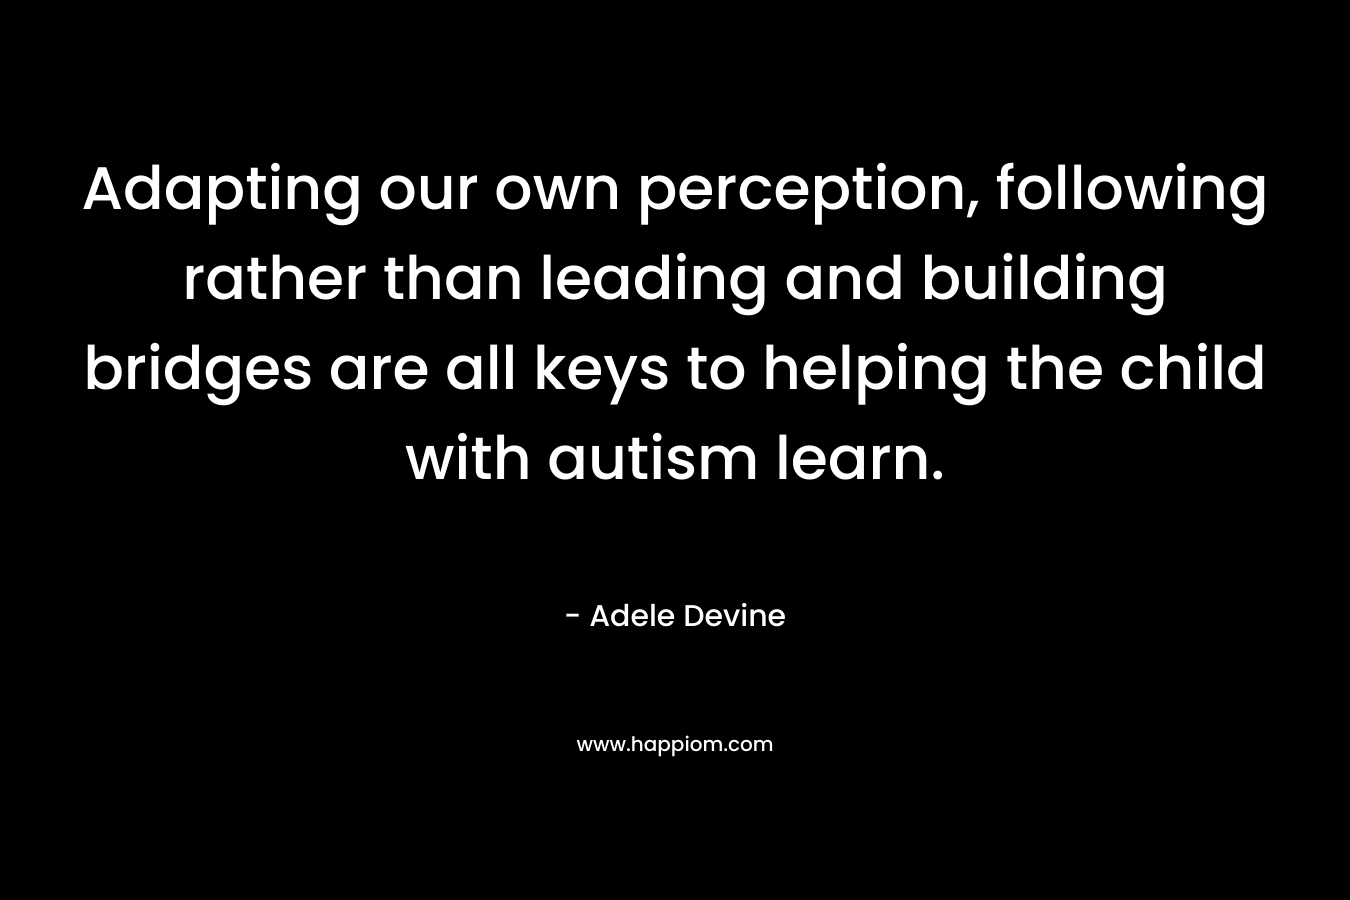 Adapting our own perception, following rather than leading and building bridges are all keys to helping the child with autism learn. – Adele Devine